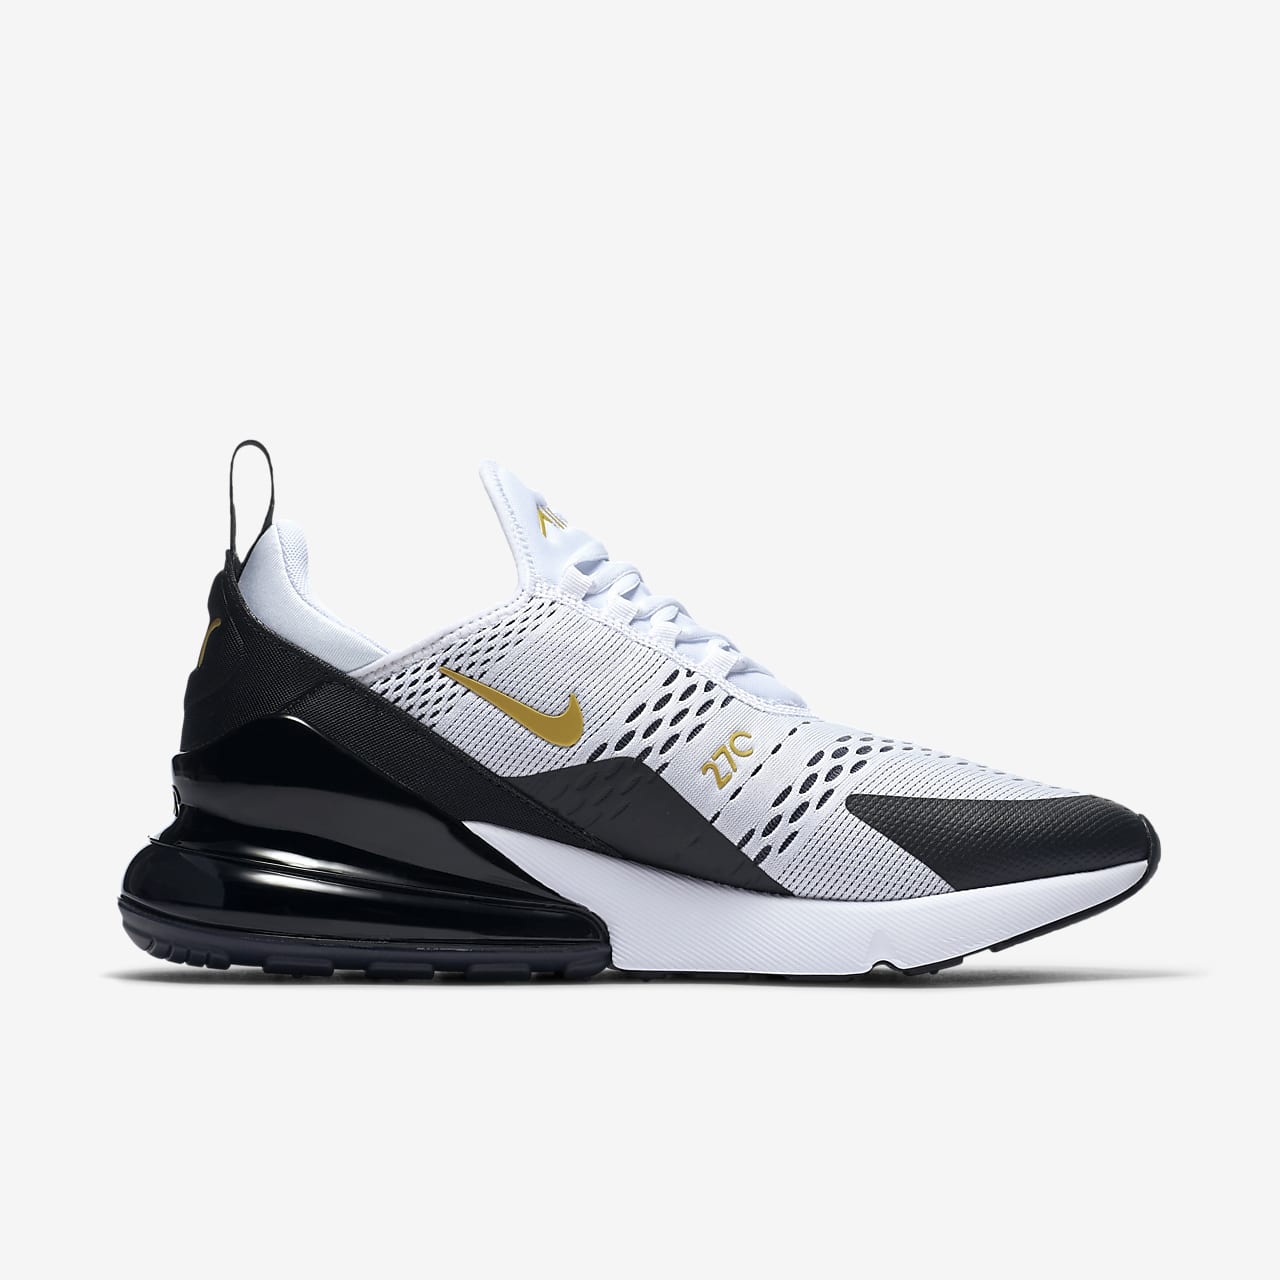 black and gold nike shoes men's